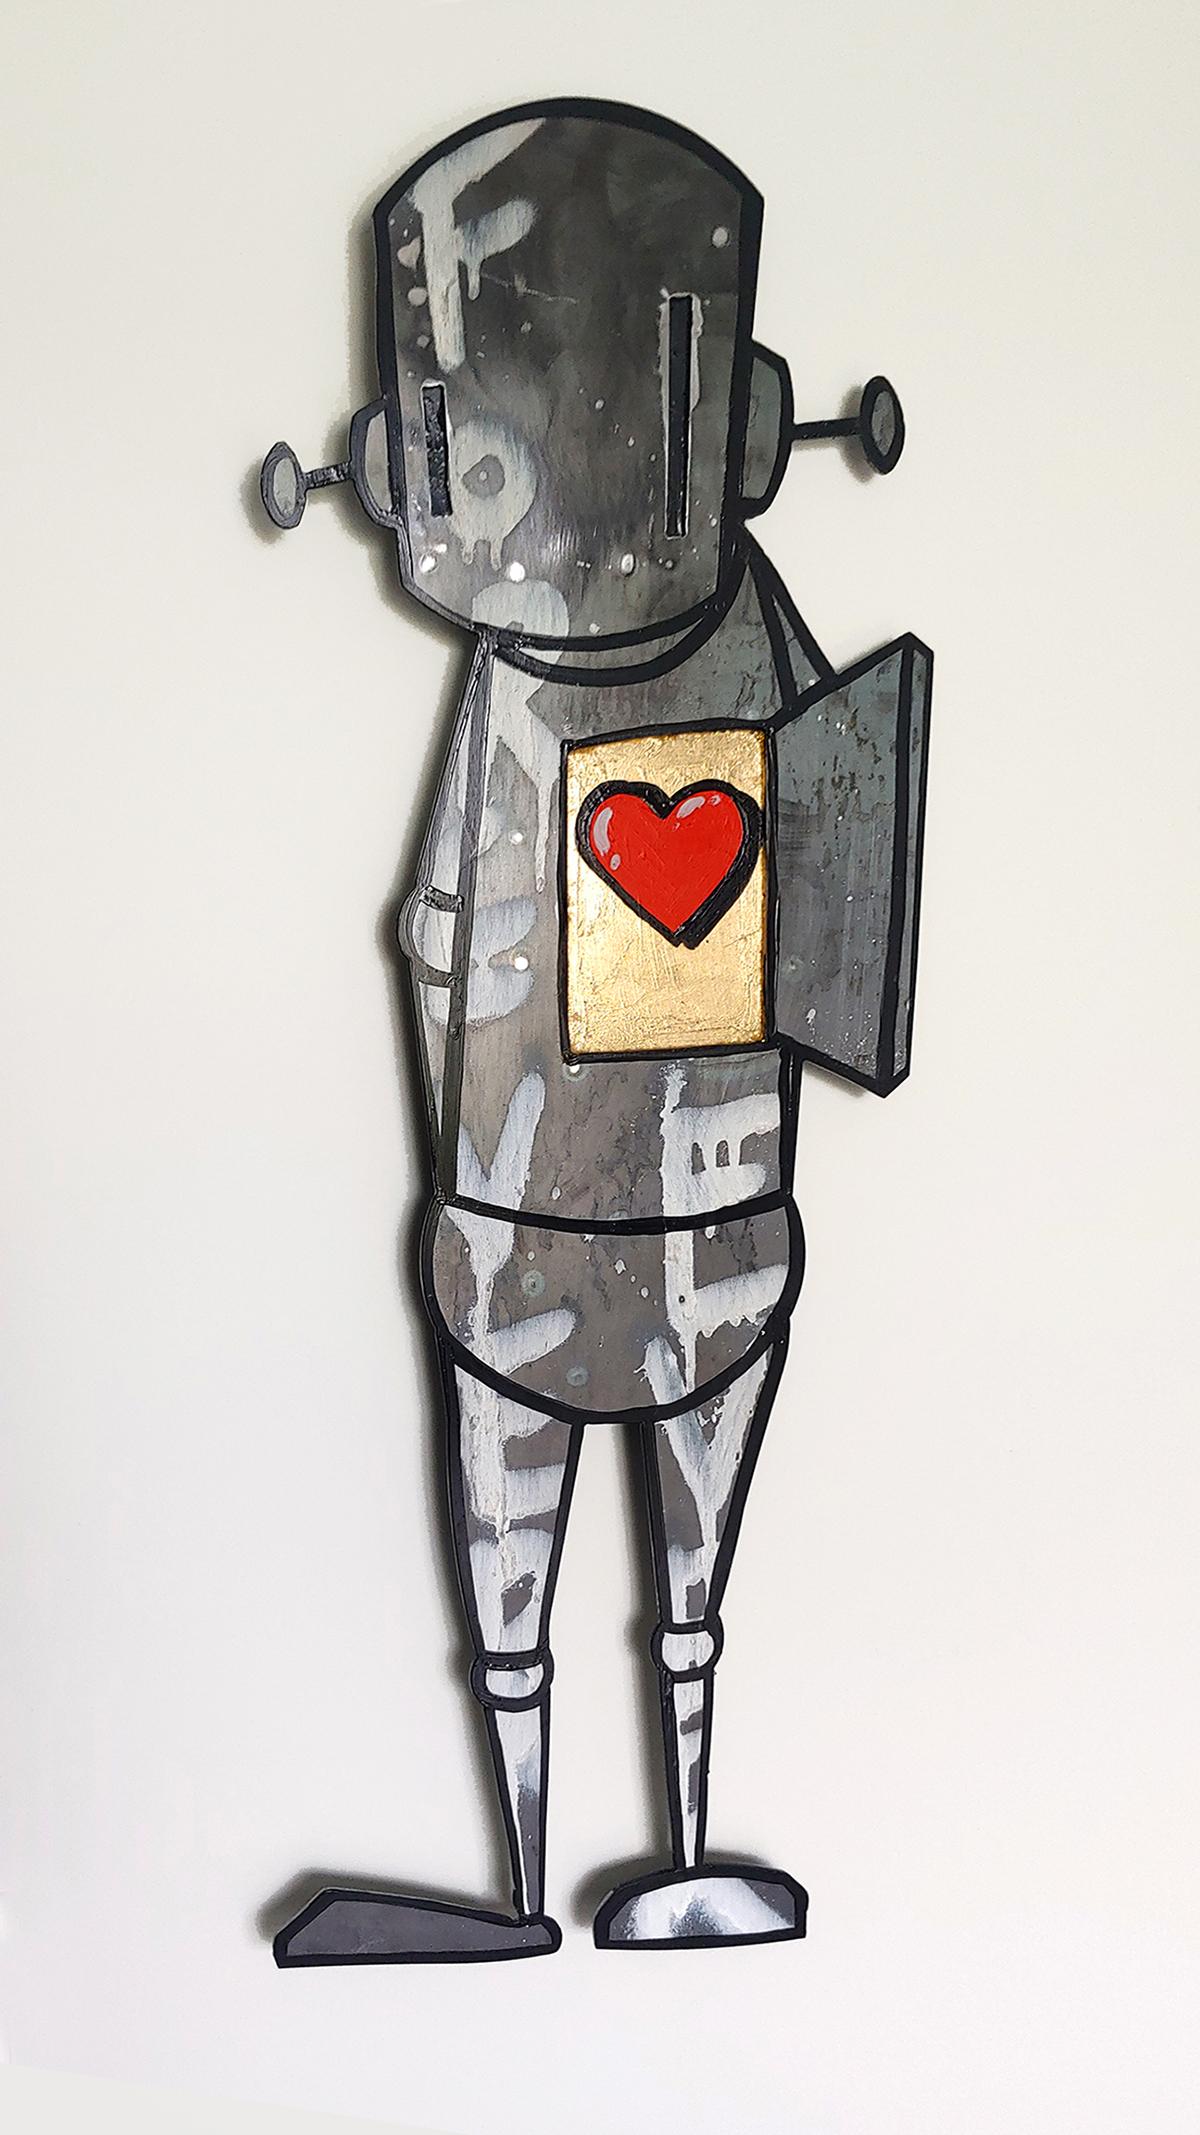 Chris RWK Figurative Painting - "Steel My Heart" take 20% off metal cutout with Gold leaf and acrylic 26x10"